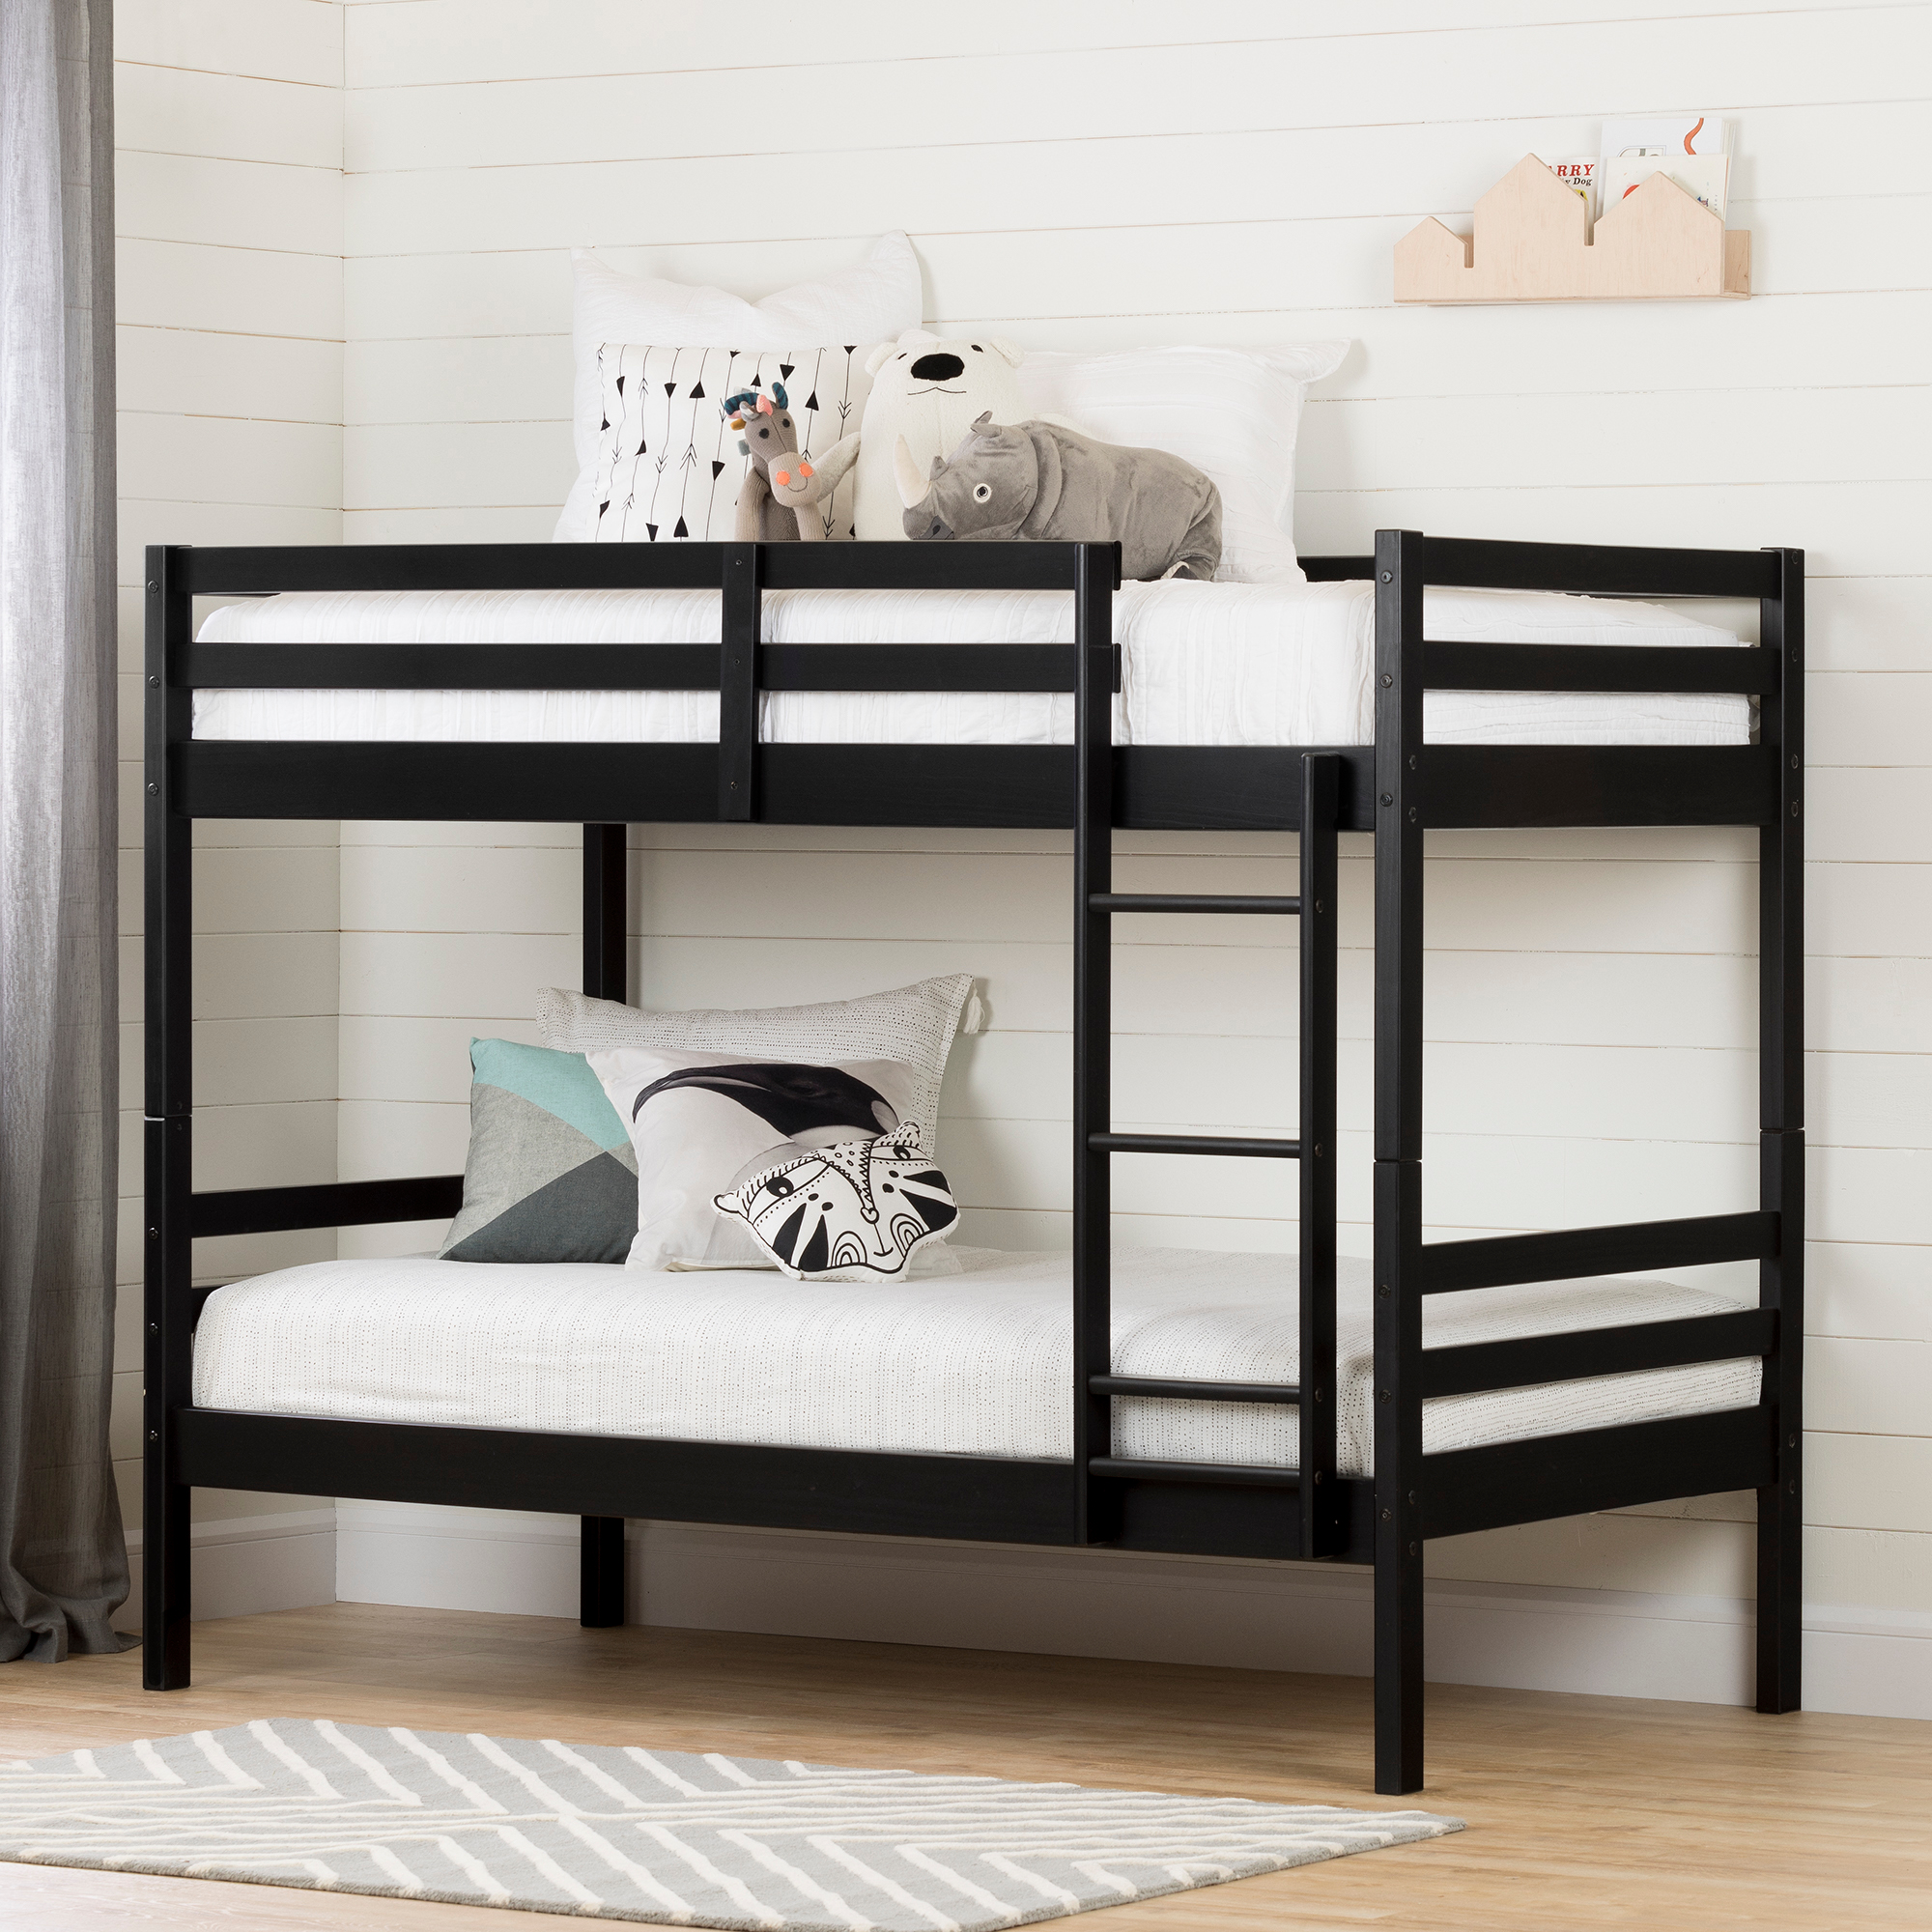 South S Fakto Solid Wood Bunk Beds, Dorel Belmont Twin Bunk Bed